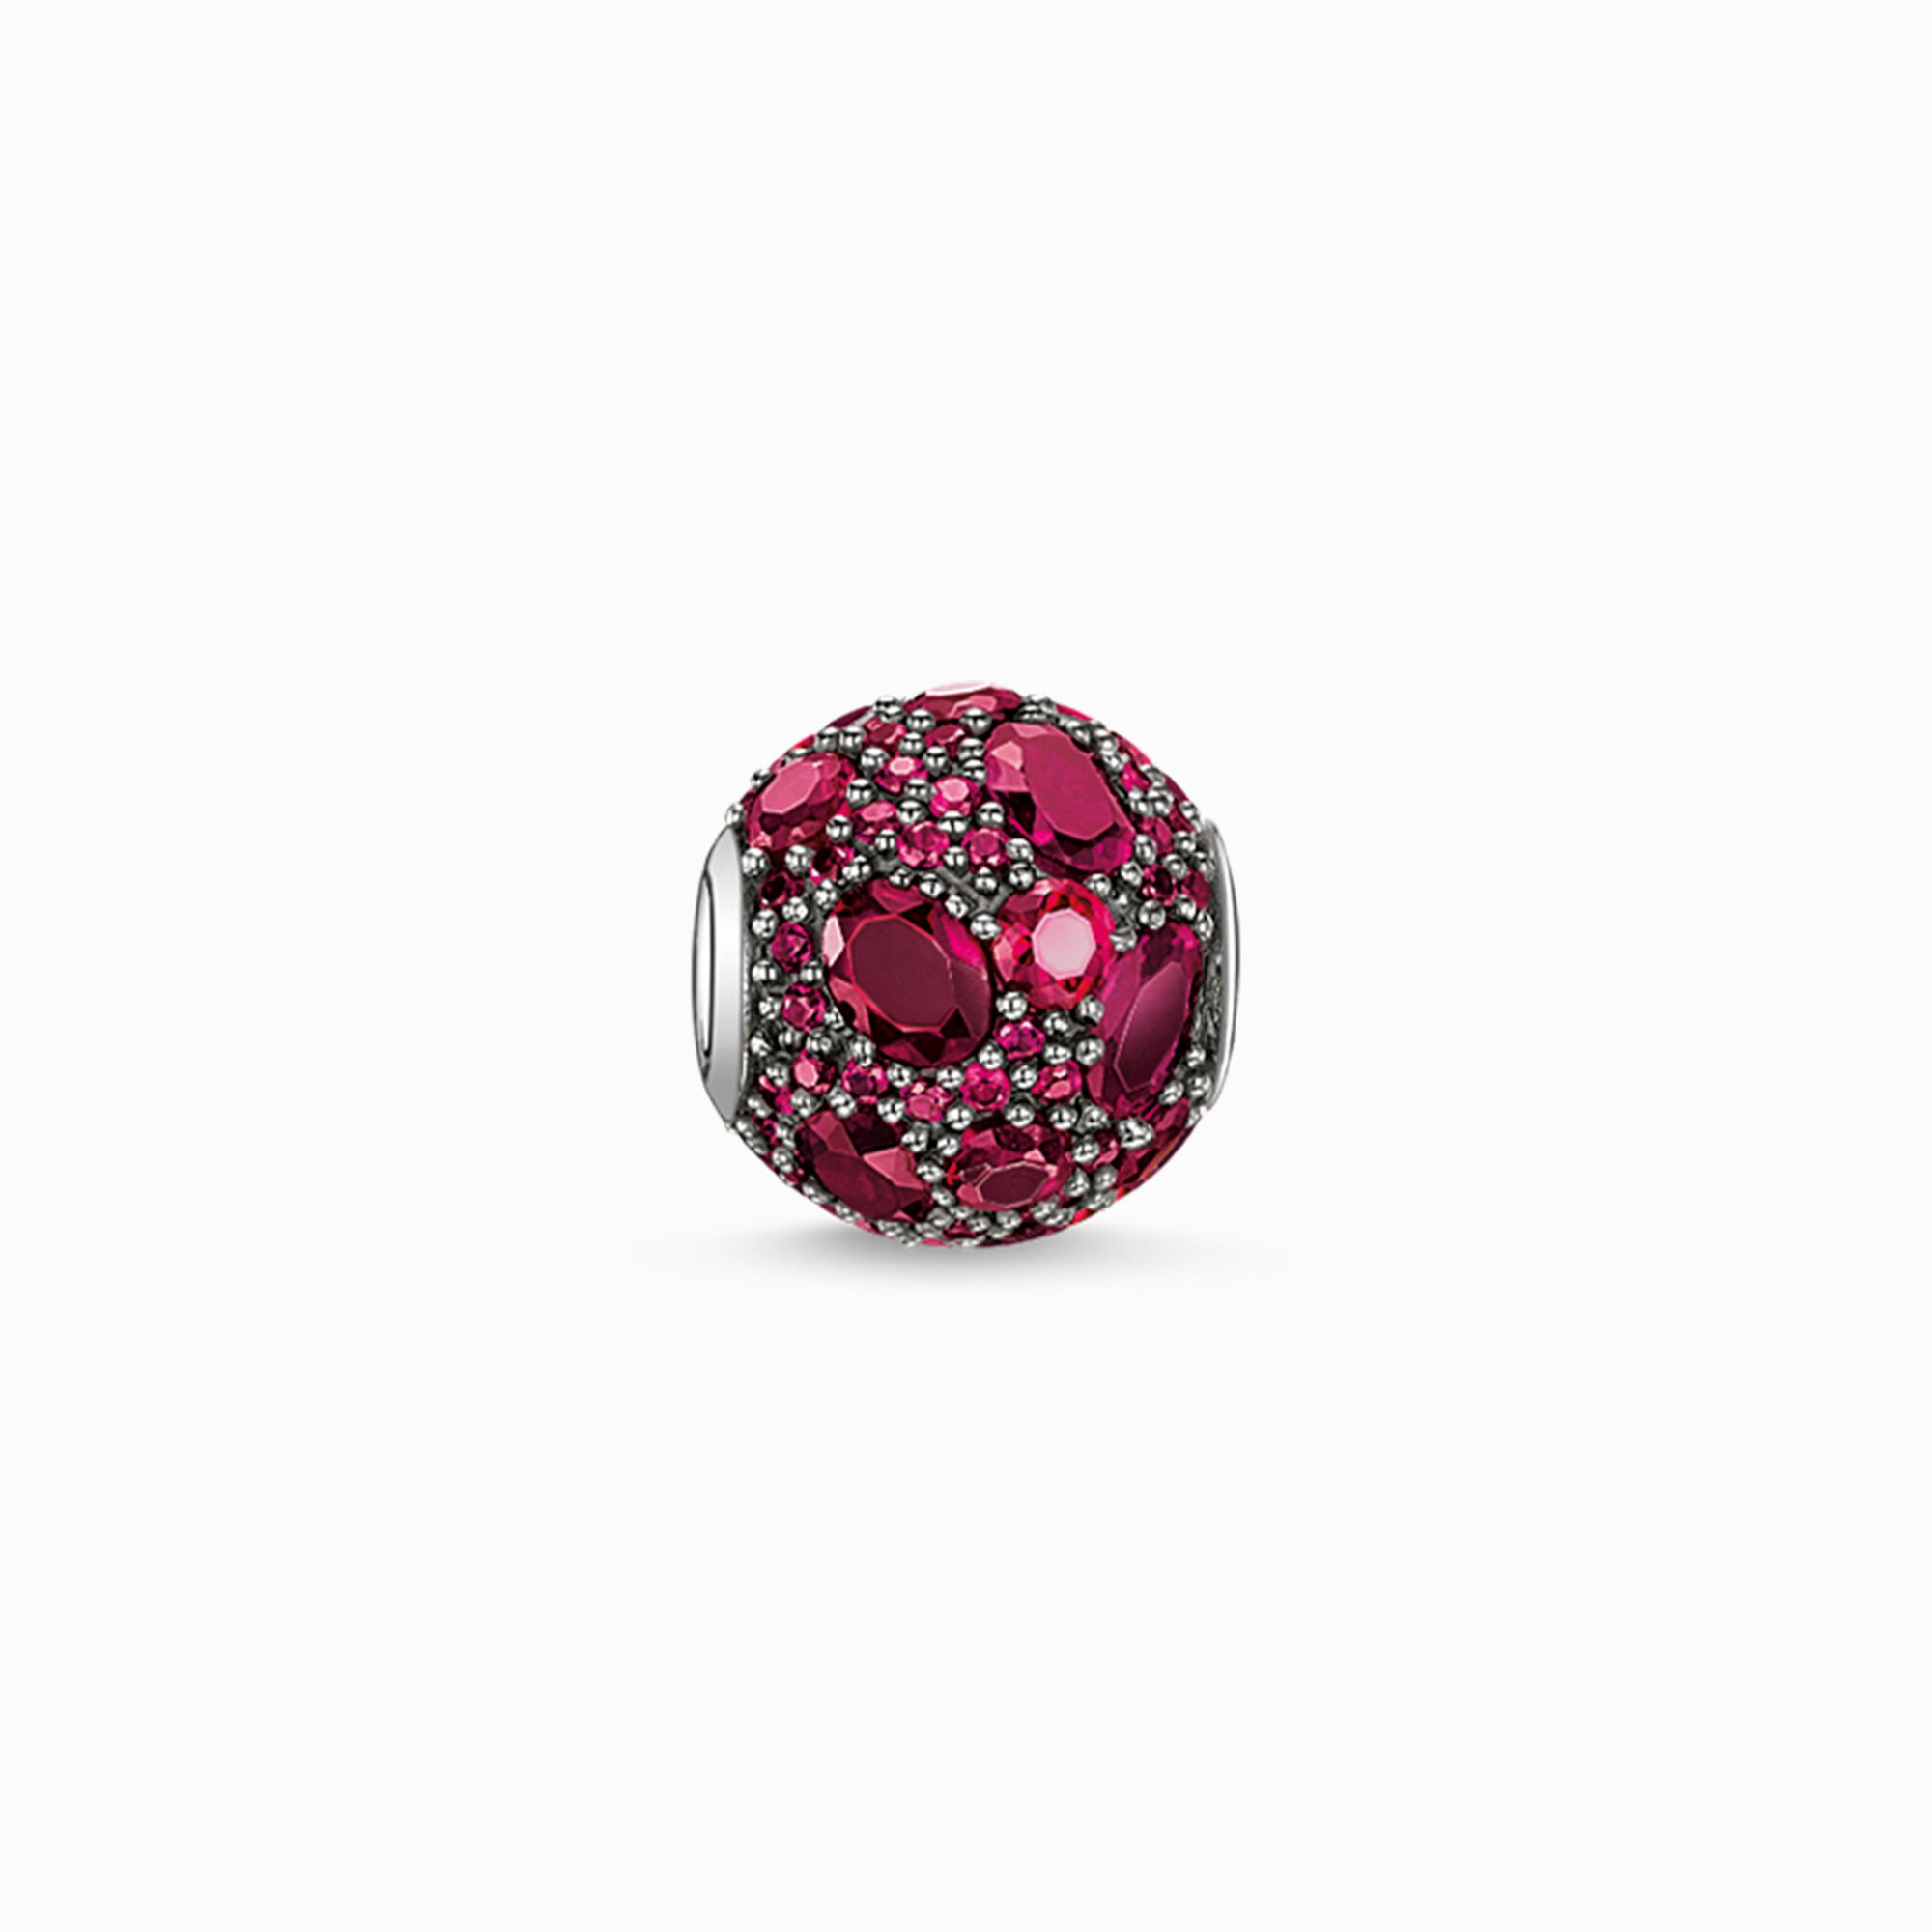 Bead red fire from the Karma Beads collection in the THOMAS SABO online store